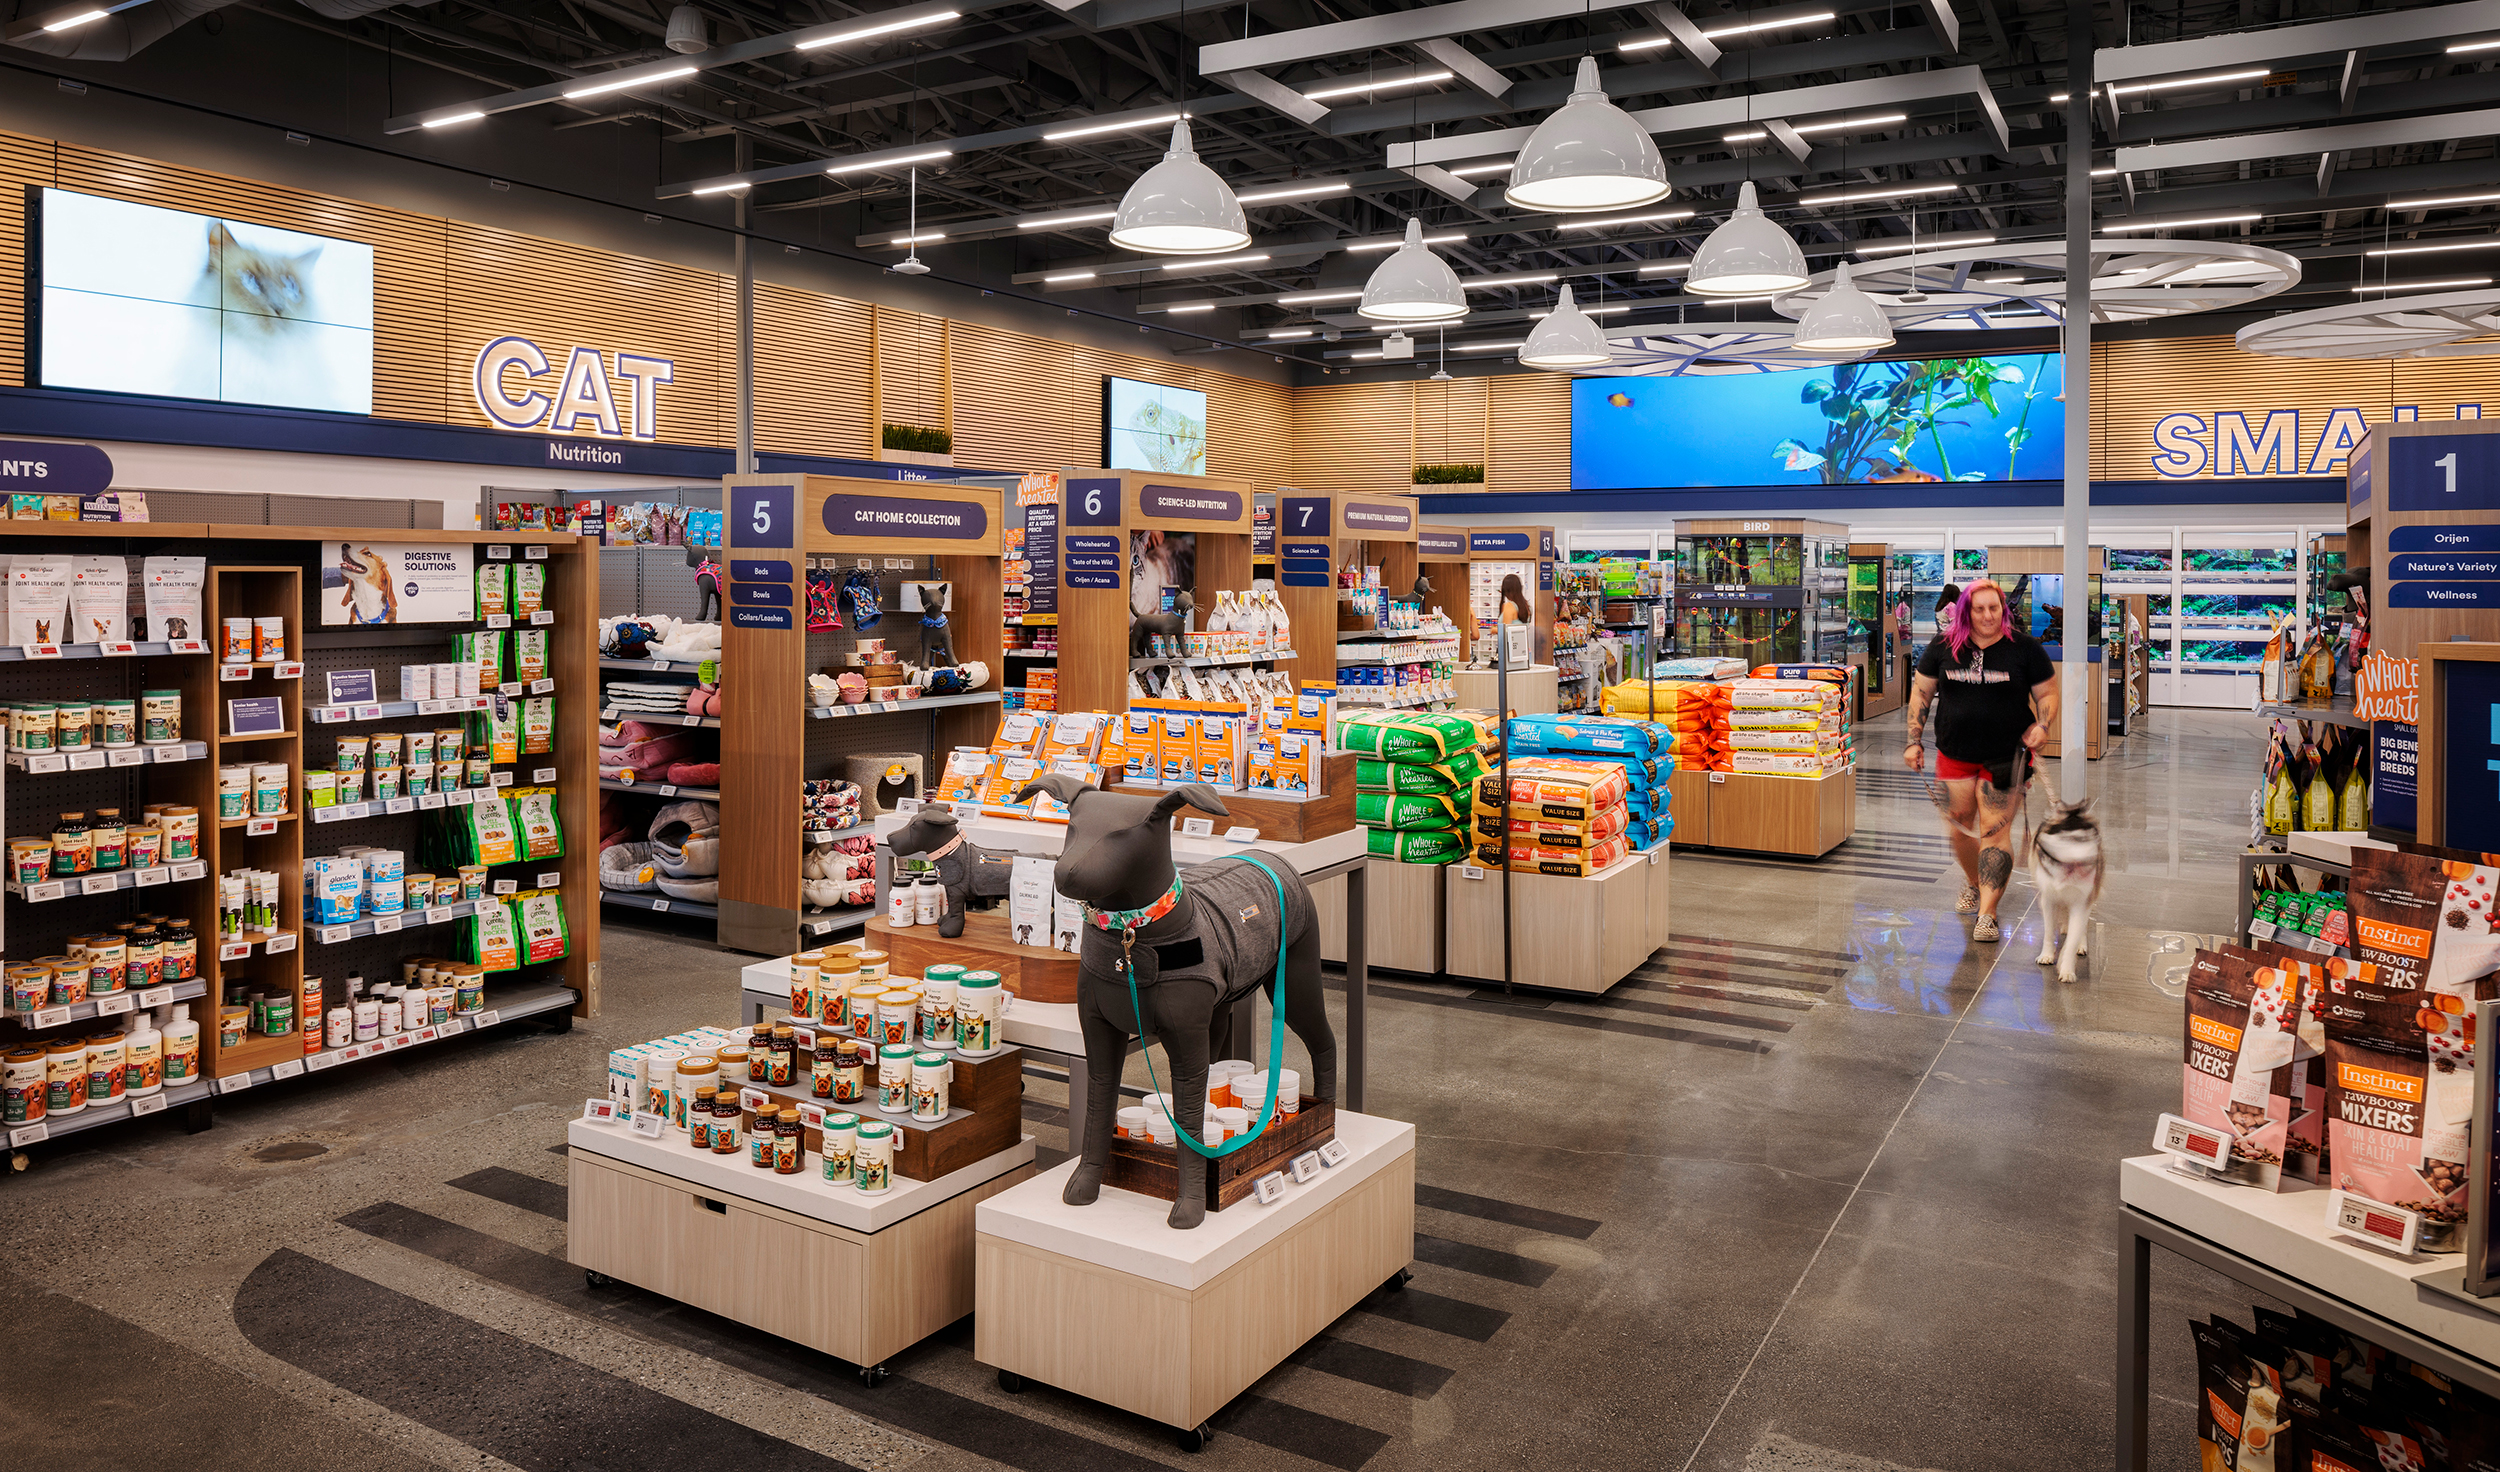 This page: Petco’s latest “next-generation store” aims to offer a personalized experience for customers through a seamless in-store journey.